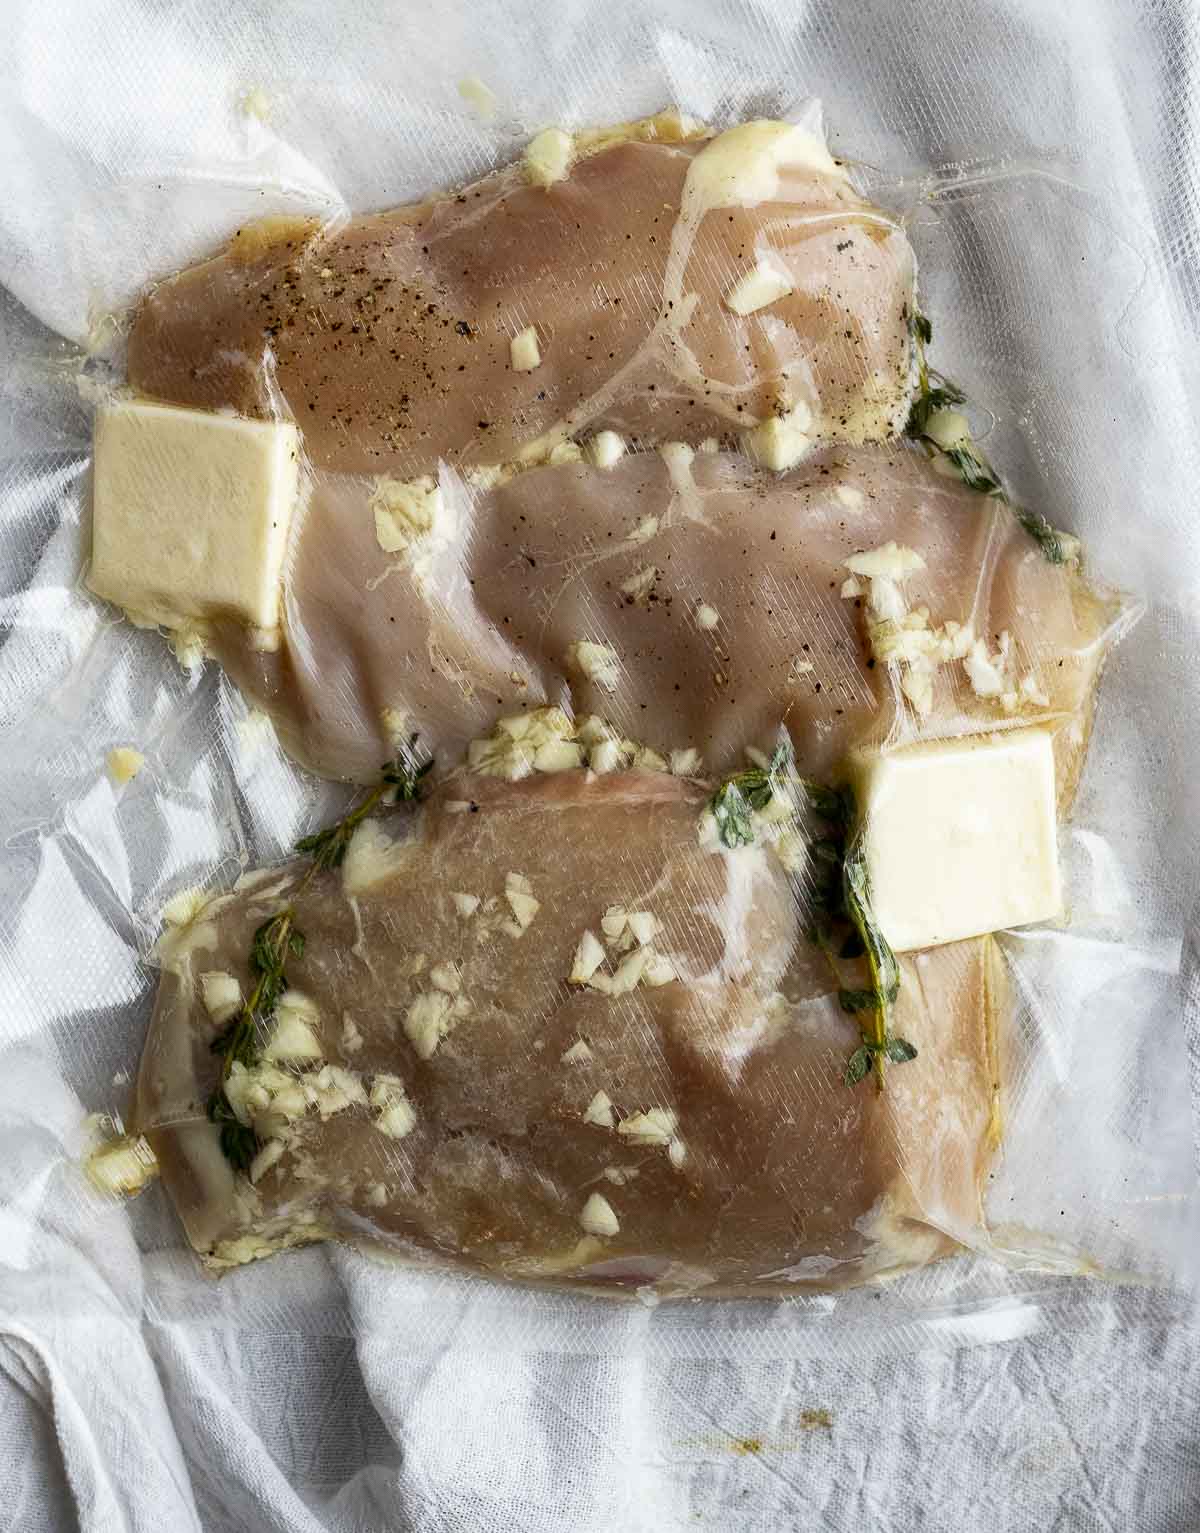 https://www.wenthere8this.com/wp-content/uploads/2021/01/sous-vide-chicken-breast.jpg